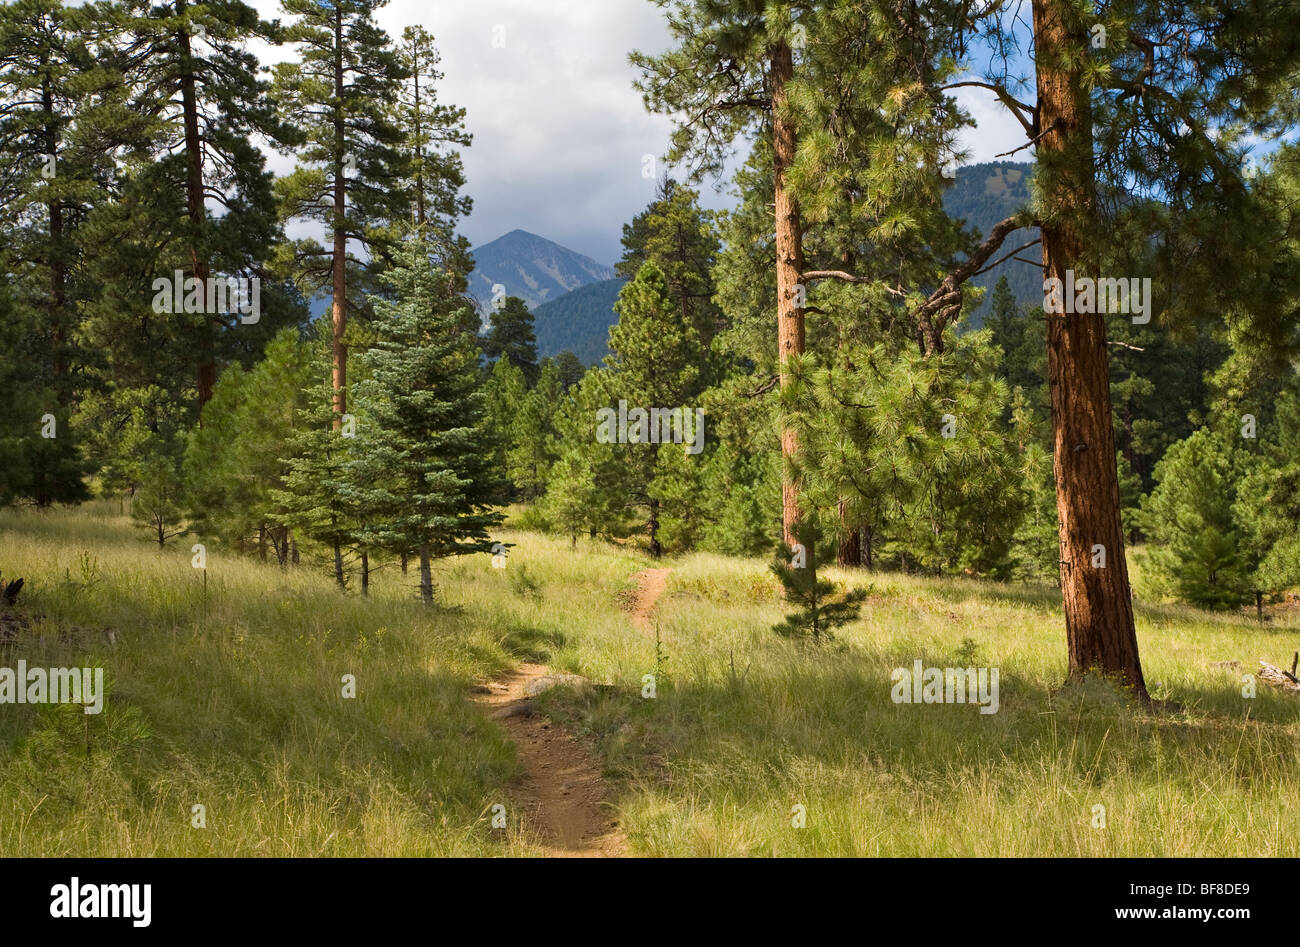 Little Elden Trail winding amid ponderosa forest and meadow, with Freemont Peak in back, Coconino National Forest, Arizona, USA Stock Photo